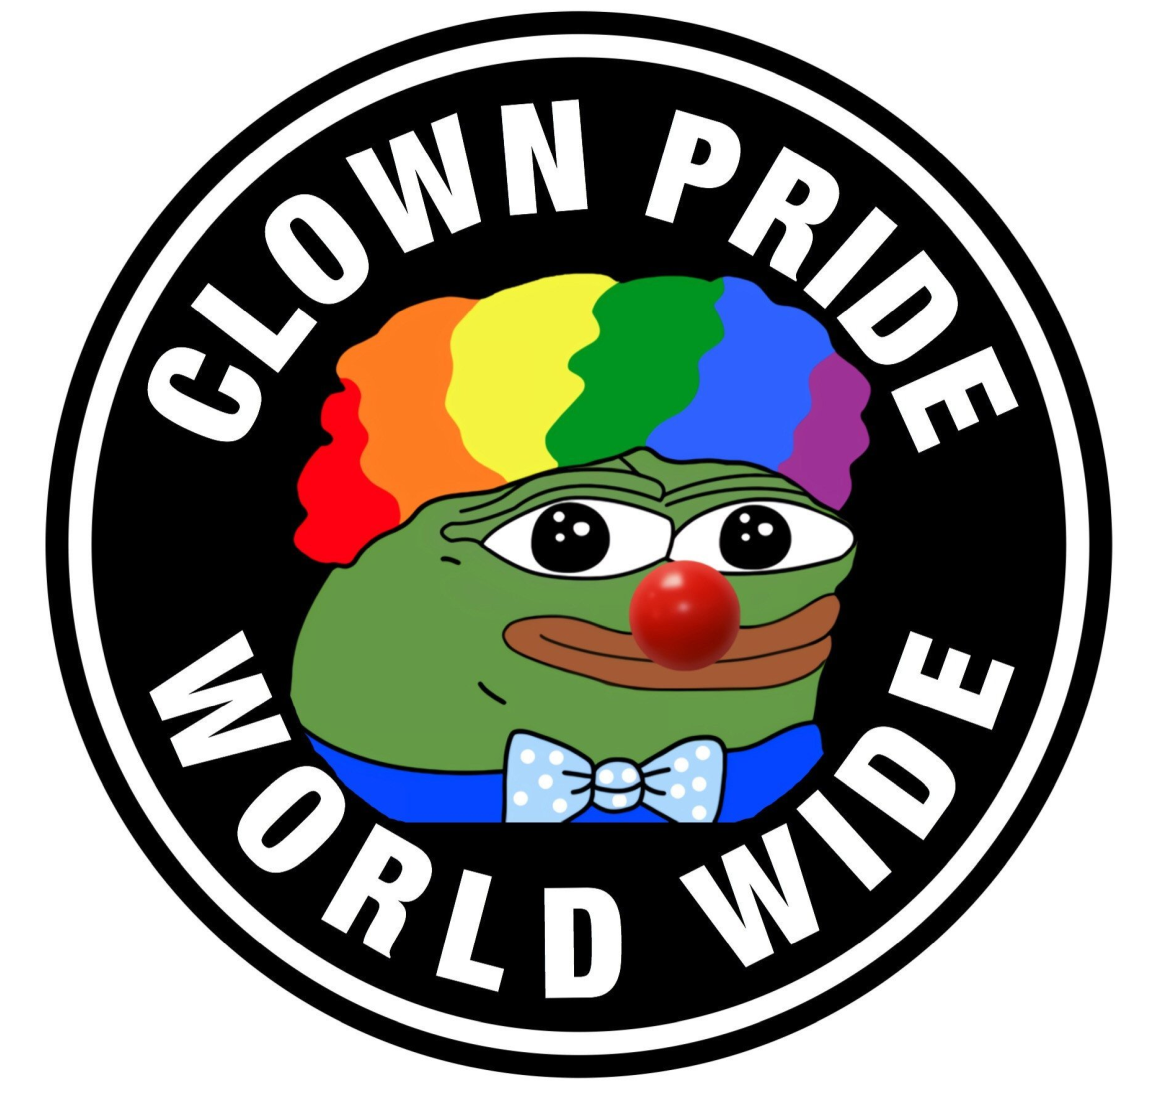 Clown Pride World Wide - Pepe The Frog